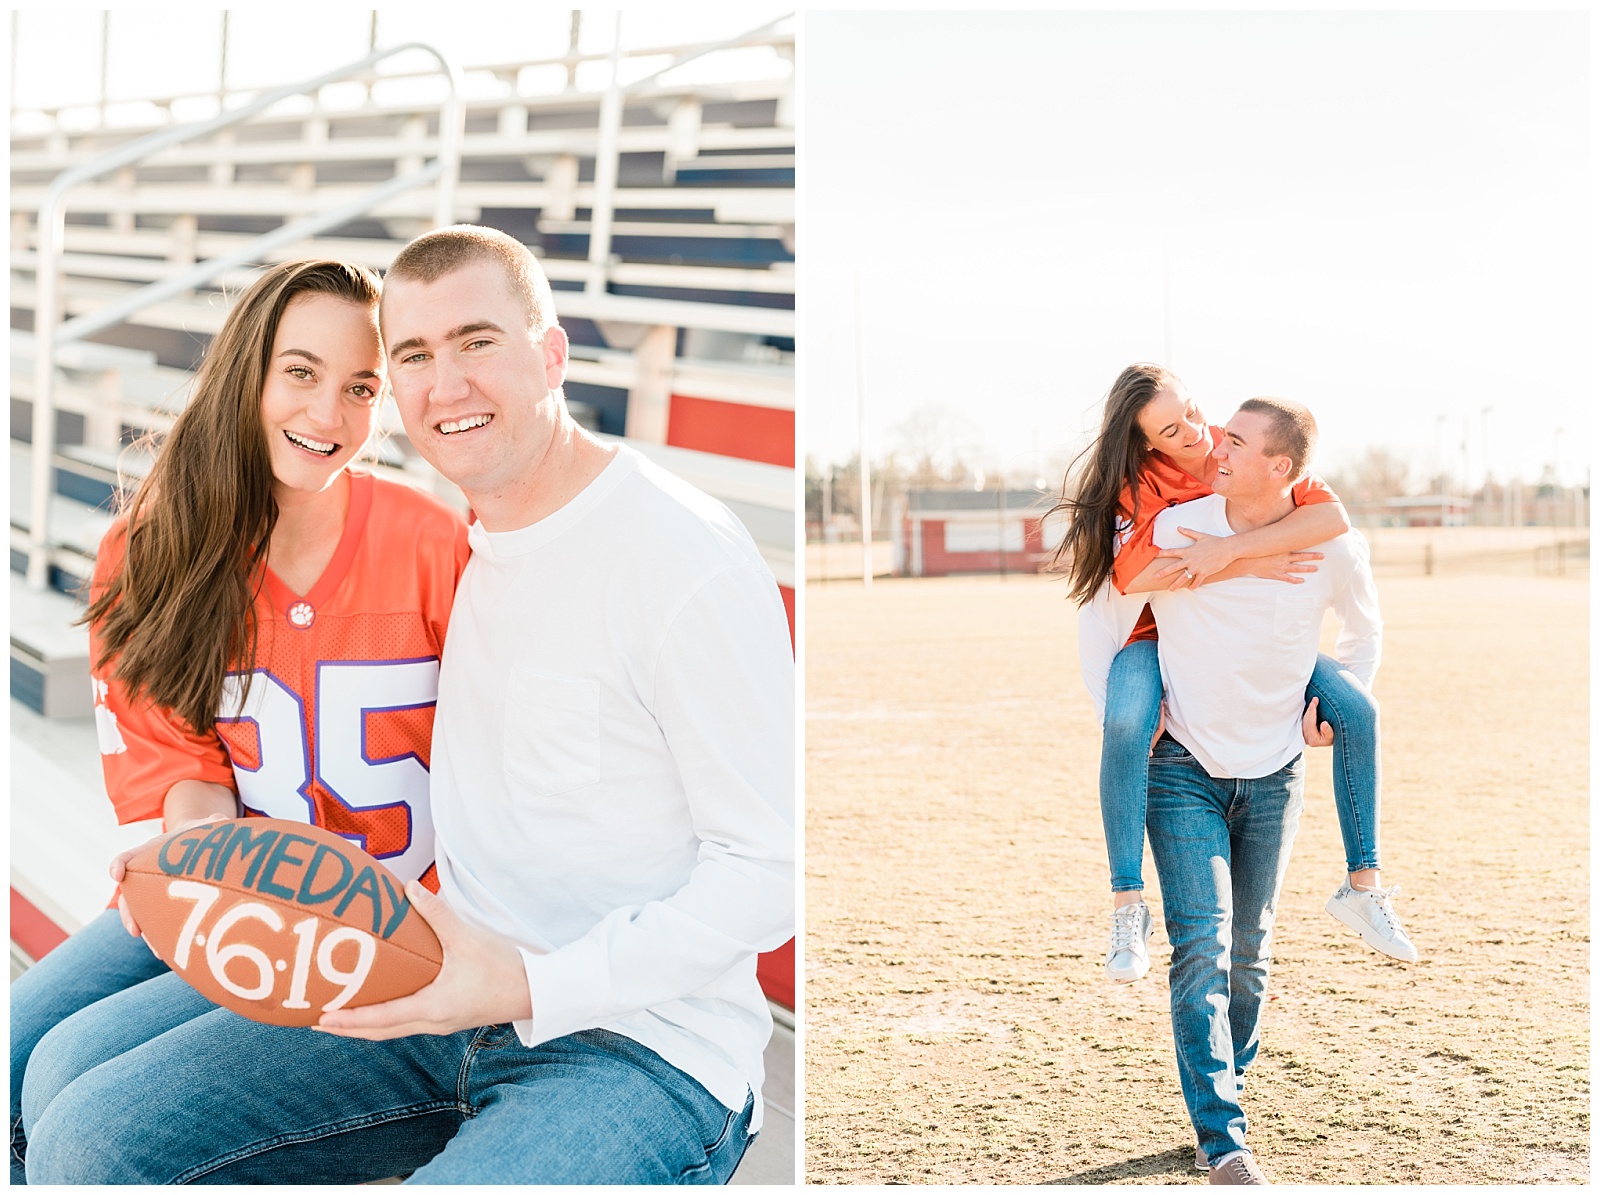 New Jersey, Save the Date, Engagement Session, Wedding Photographer, NFL, Coach, LA Chargers, Football, Athletic, Sporty, Jersey